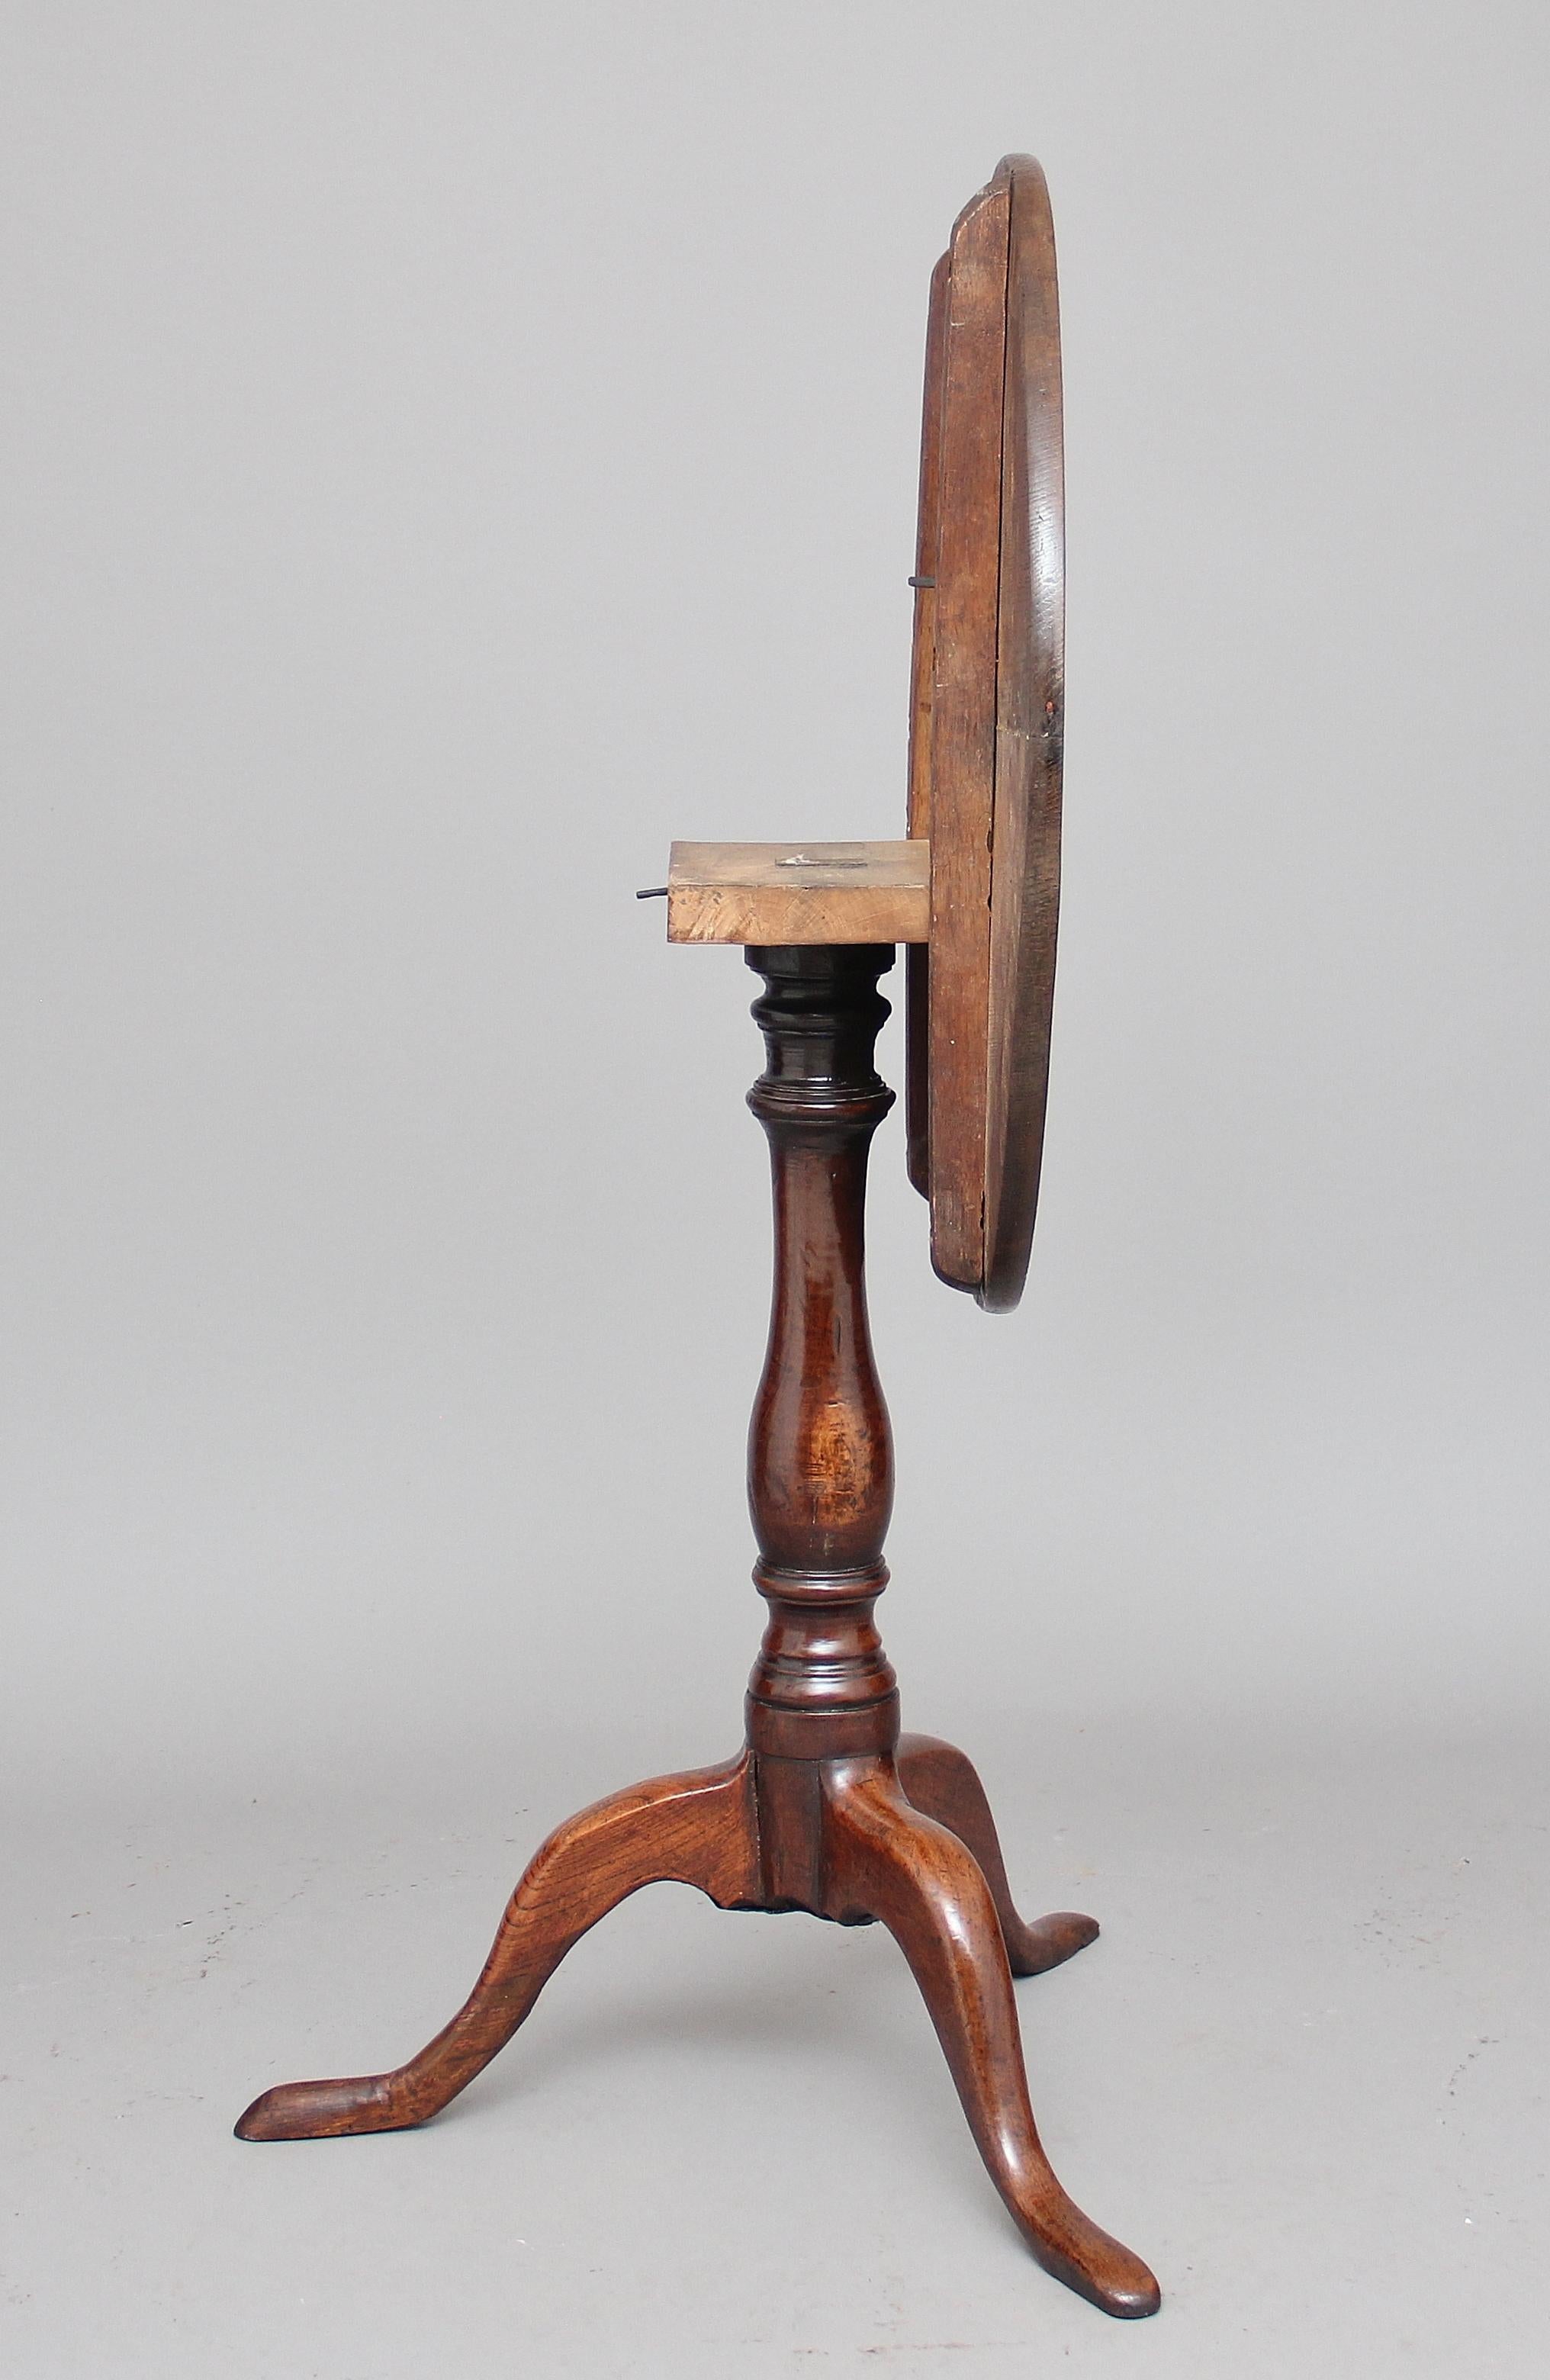 18th century oak tripod table, the circular tilt top supported on a lovely turned column with three slender cabriole legs. Lovely patina, circa 1780.